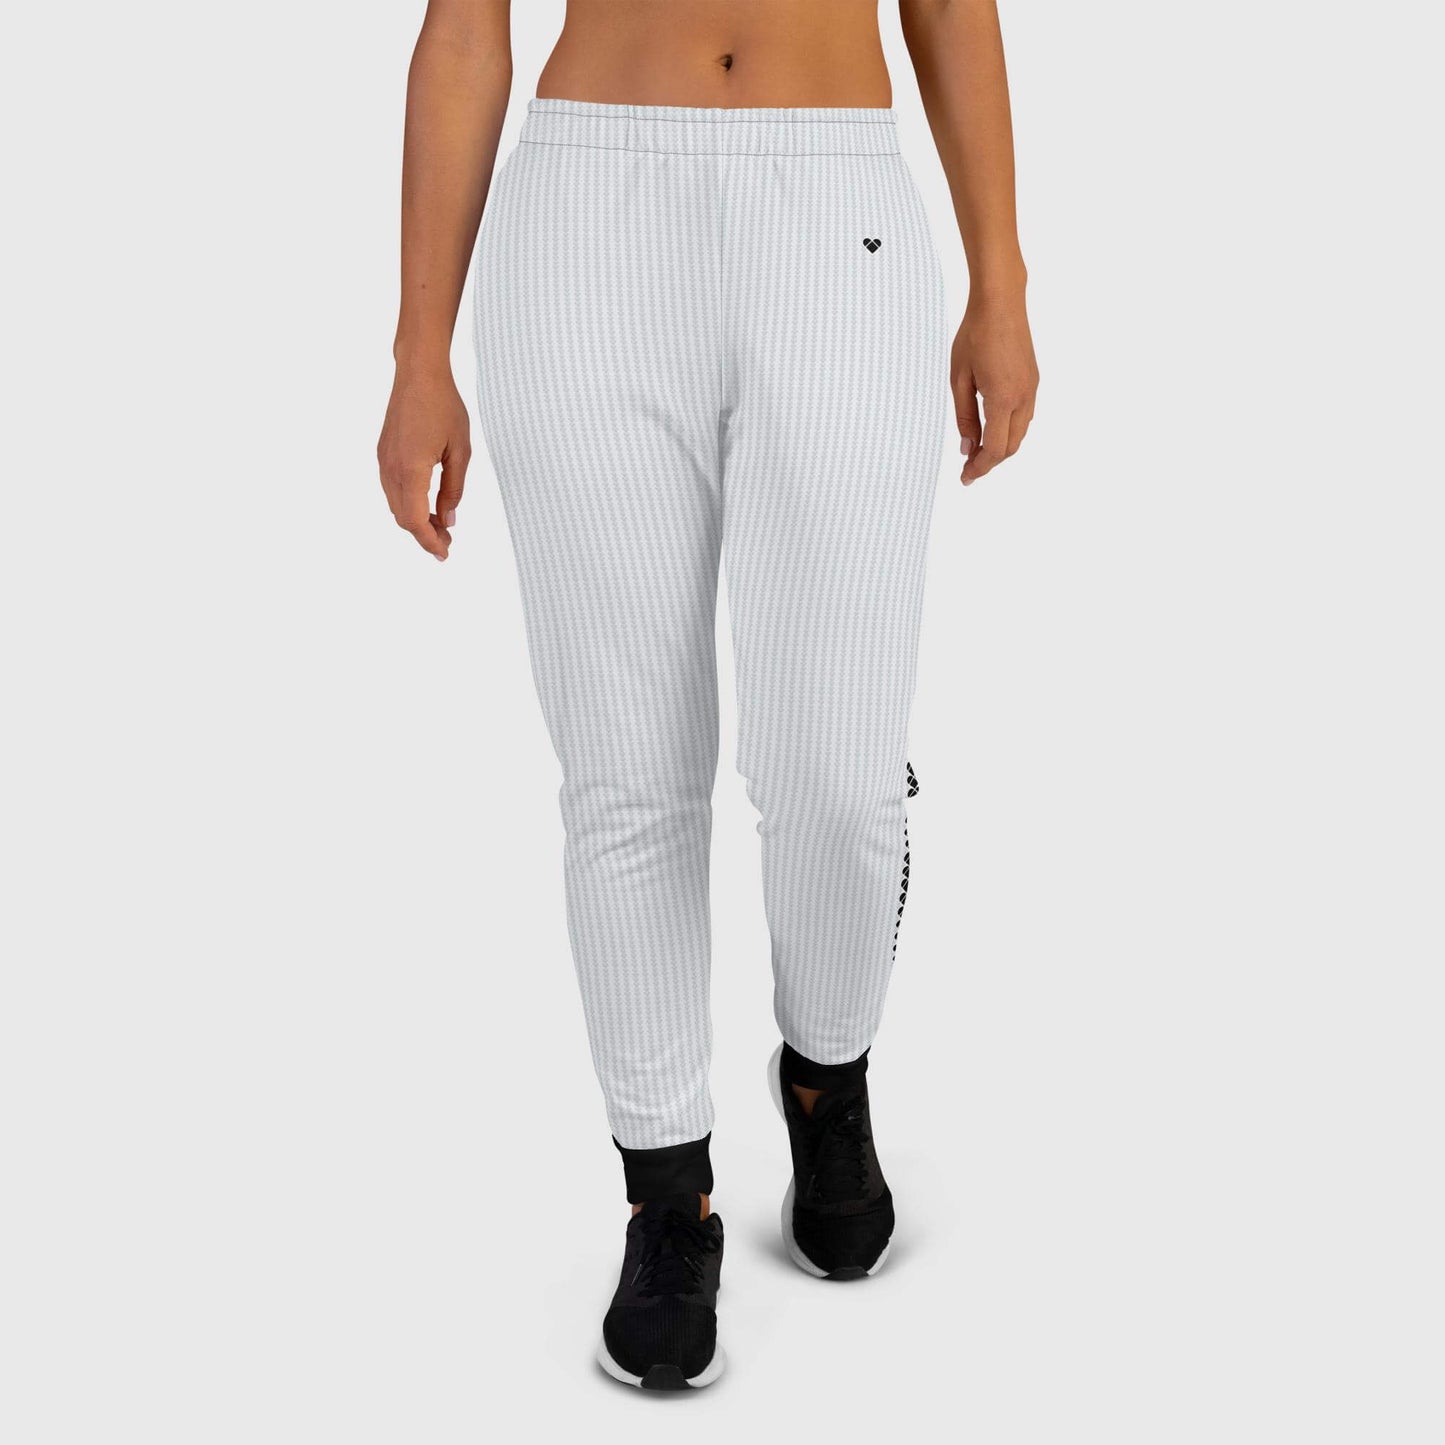 front view of Chill wear light gray joggers with a heart-shaped geometric pattern and black details on the leg cuffs for women from CRiZ AMOR's Amor Primero collection